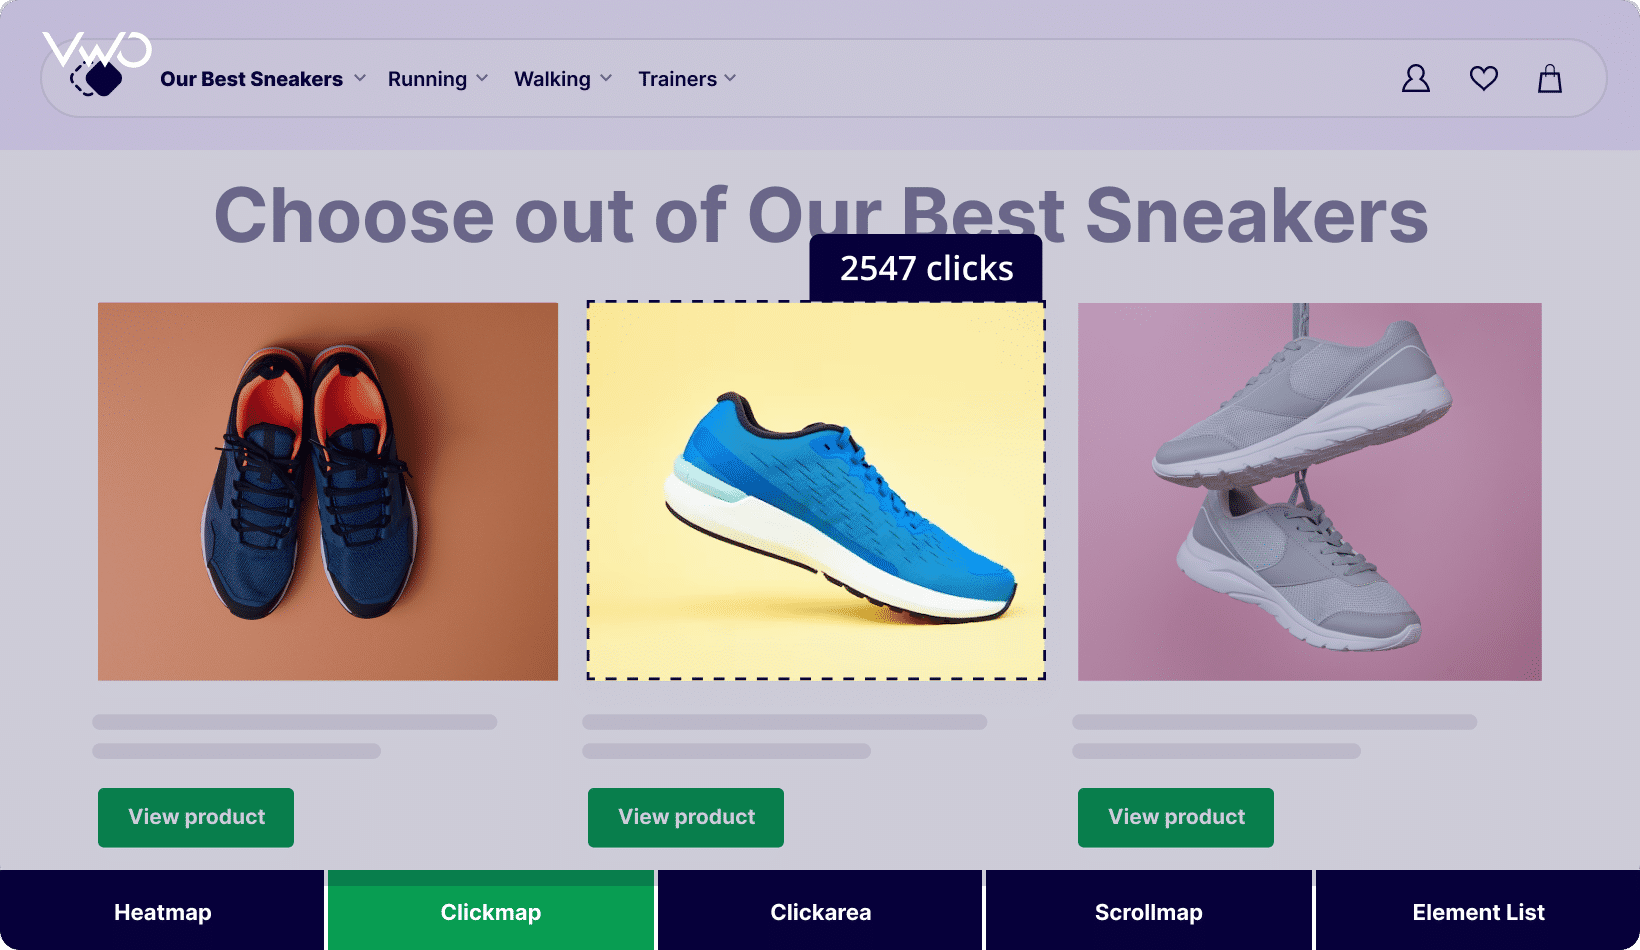 Clickmap analysis of the product listing page